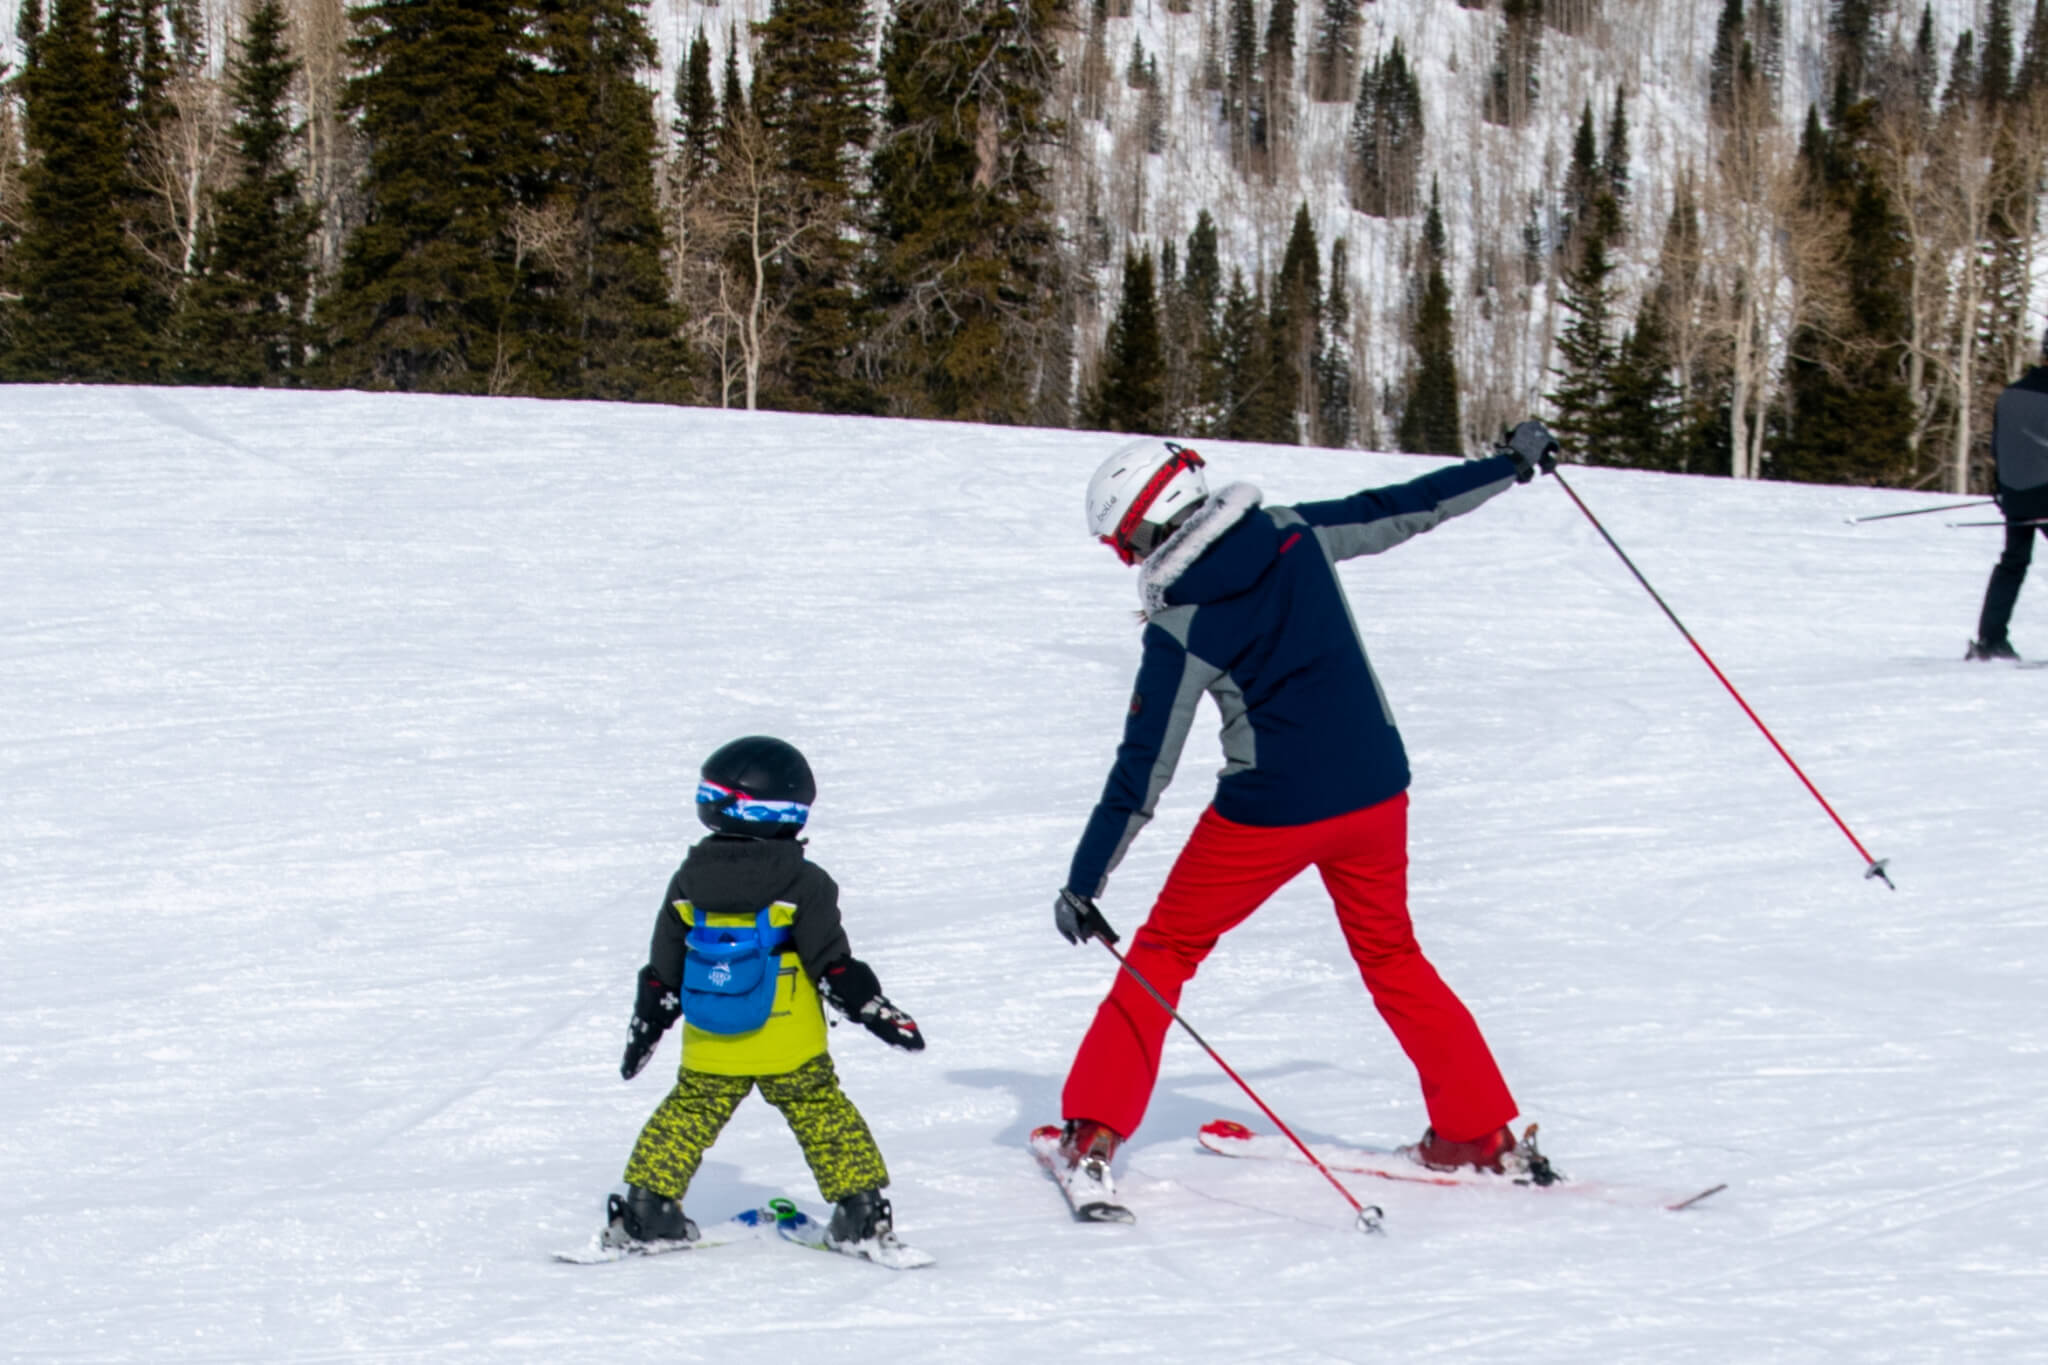 Skiing with kids during COVID